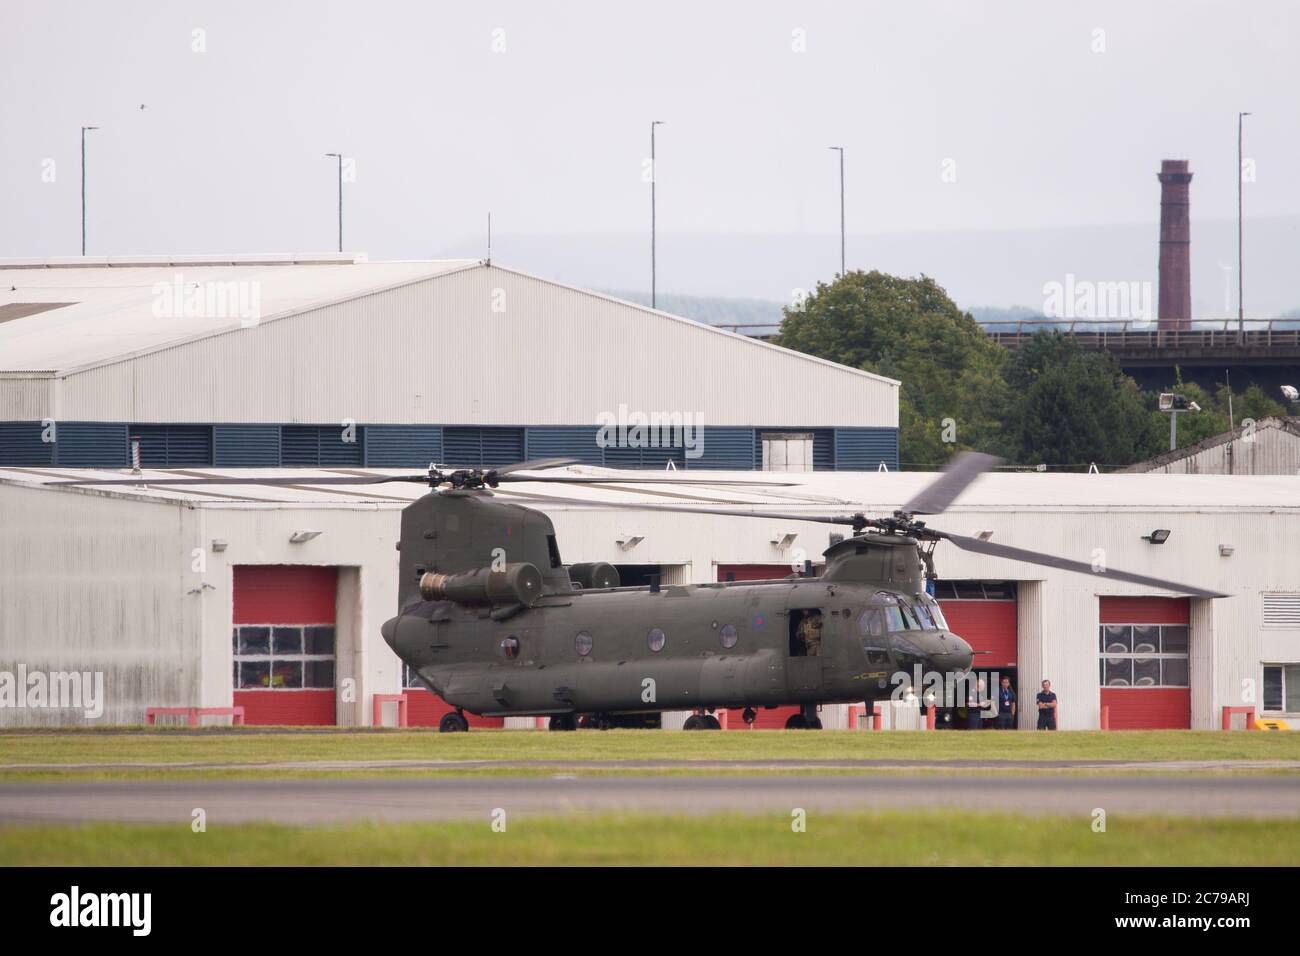 Glasgow, Scotland, UK. 15th July, 2020. Pictured: Royal Air Force Chinook Helicopters seen on the tarmac and taking off from Glasgow International Airport. One of the helicopters had gone ‘technical' with an engine problem and a spare part has been flown in by another Chinook aircraft. A lot of people and plane spotters were seen around the perimeter fence to watch the choppers taking off.  Credit: Colin Fisher/Alamy Live News Stock Photo